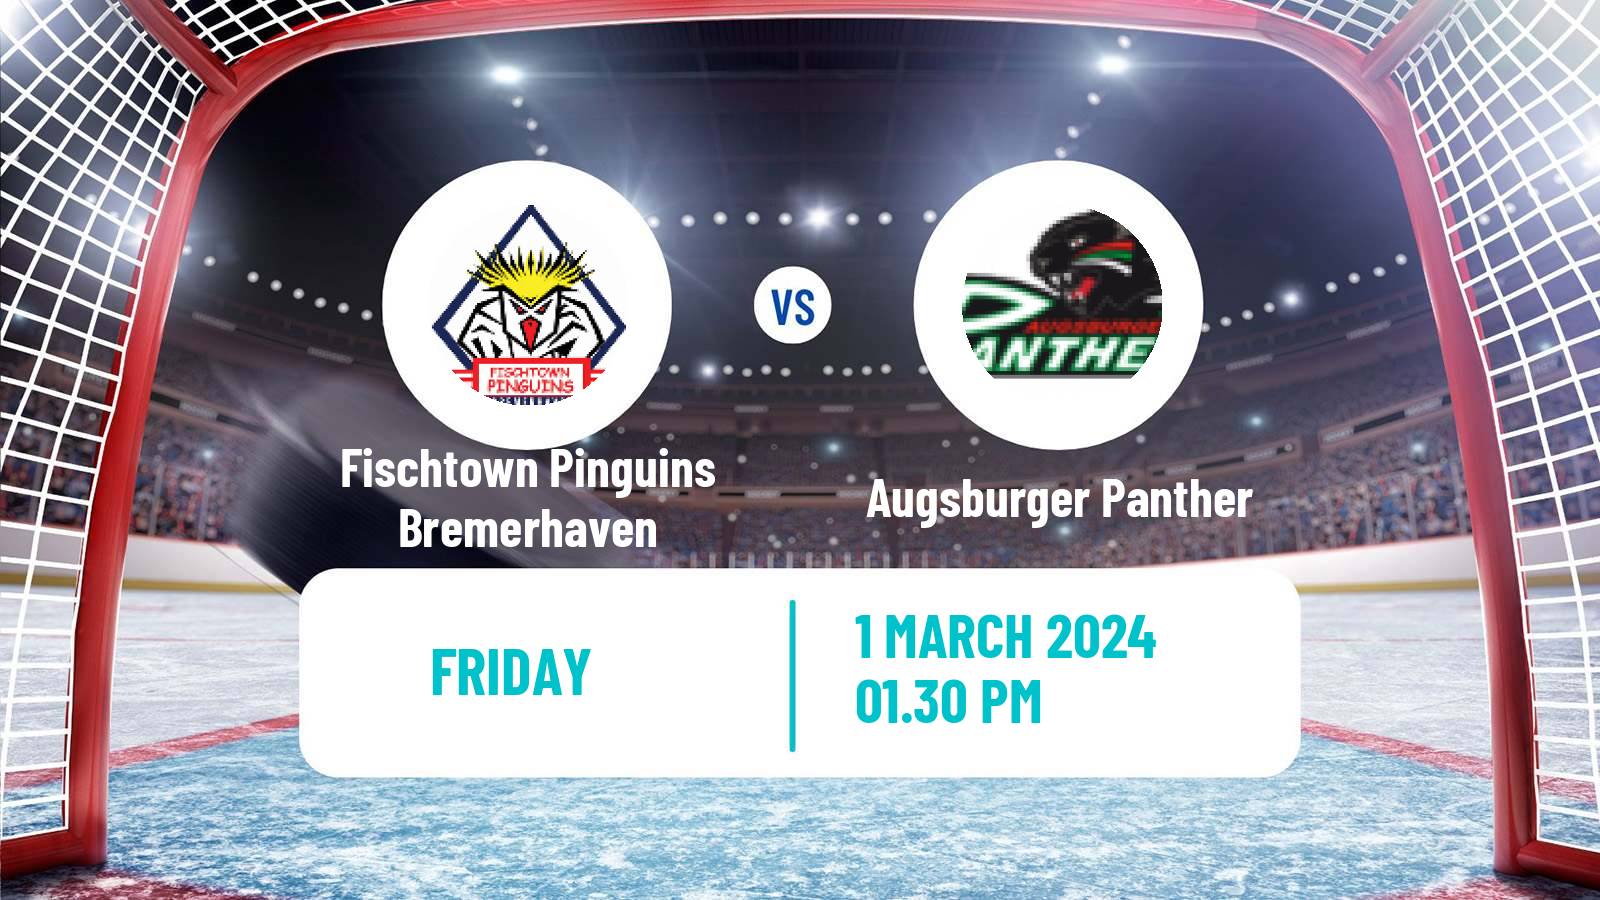 Hockey German Ice Hockey League Fischtown Pinguins Bremerhaven - Augsburger Panther